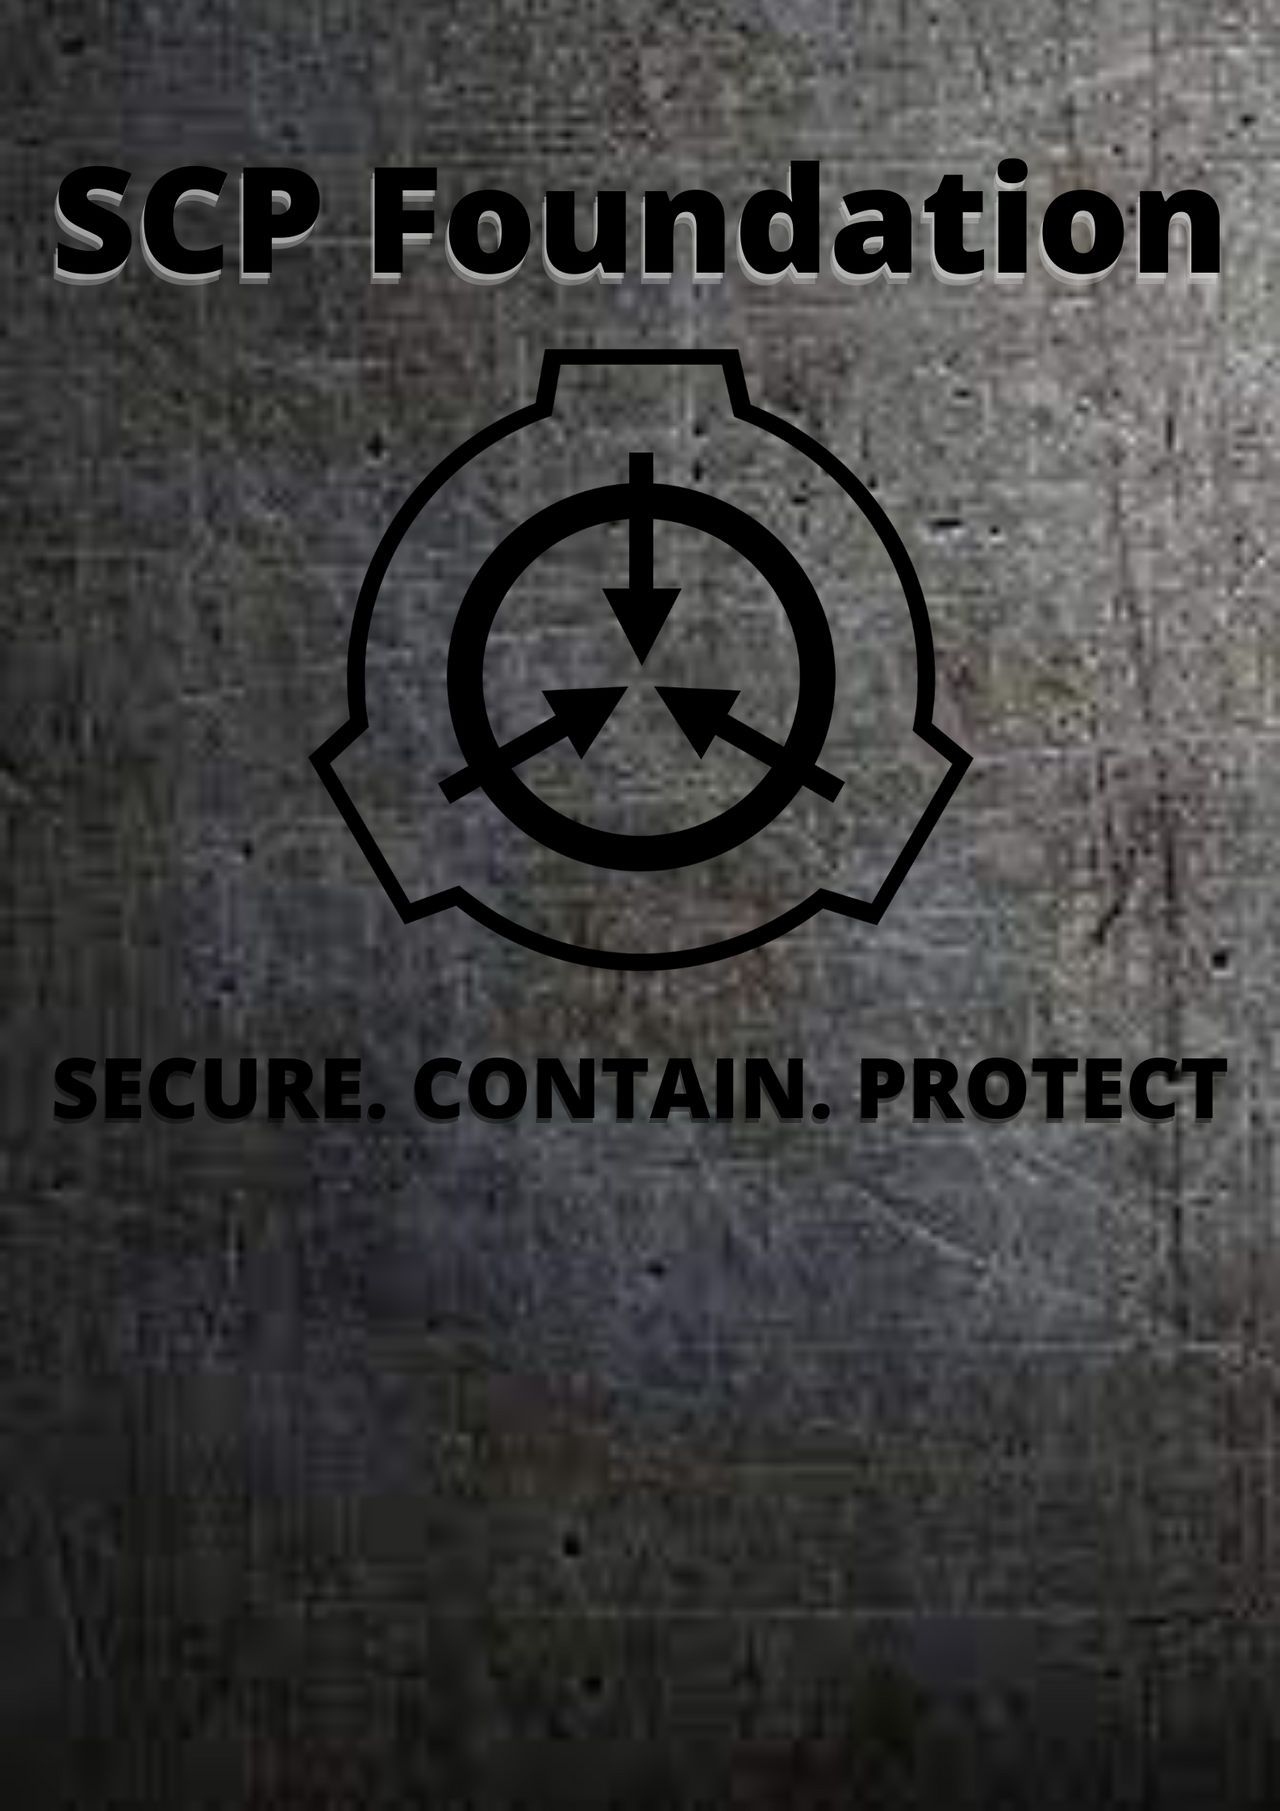 The SCP Foundation – The History Of The SCP Foundation